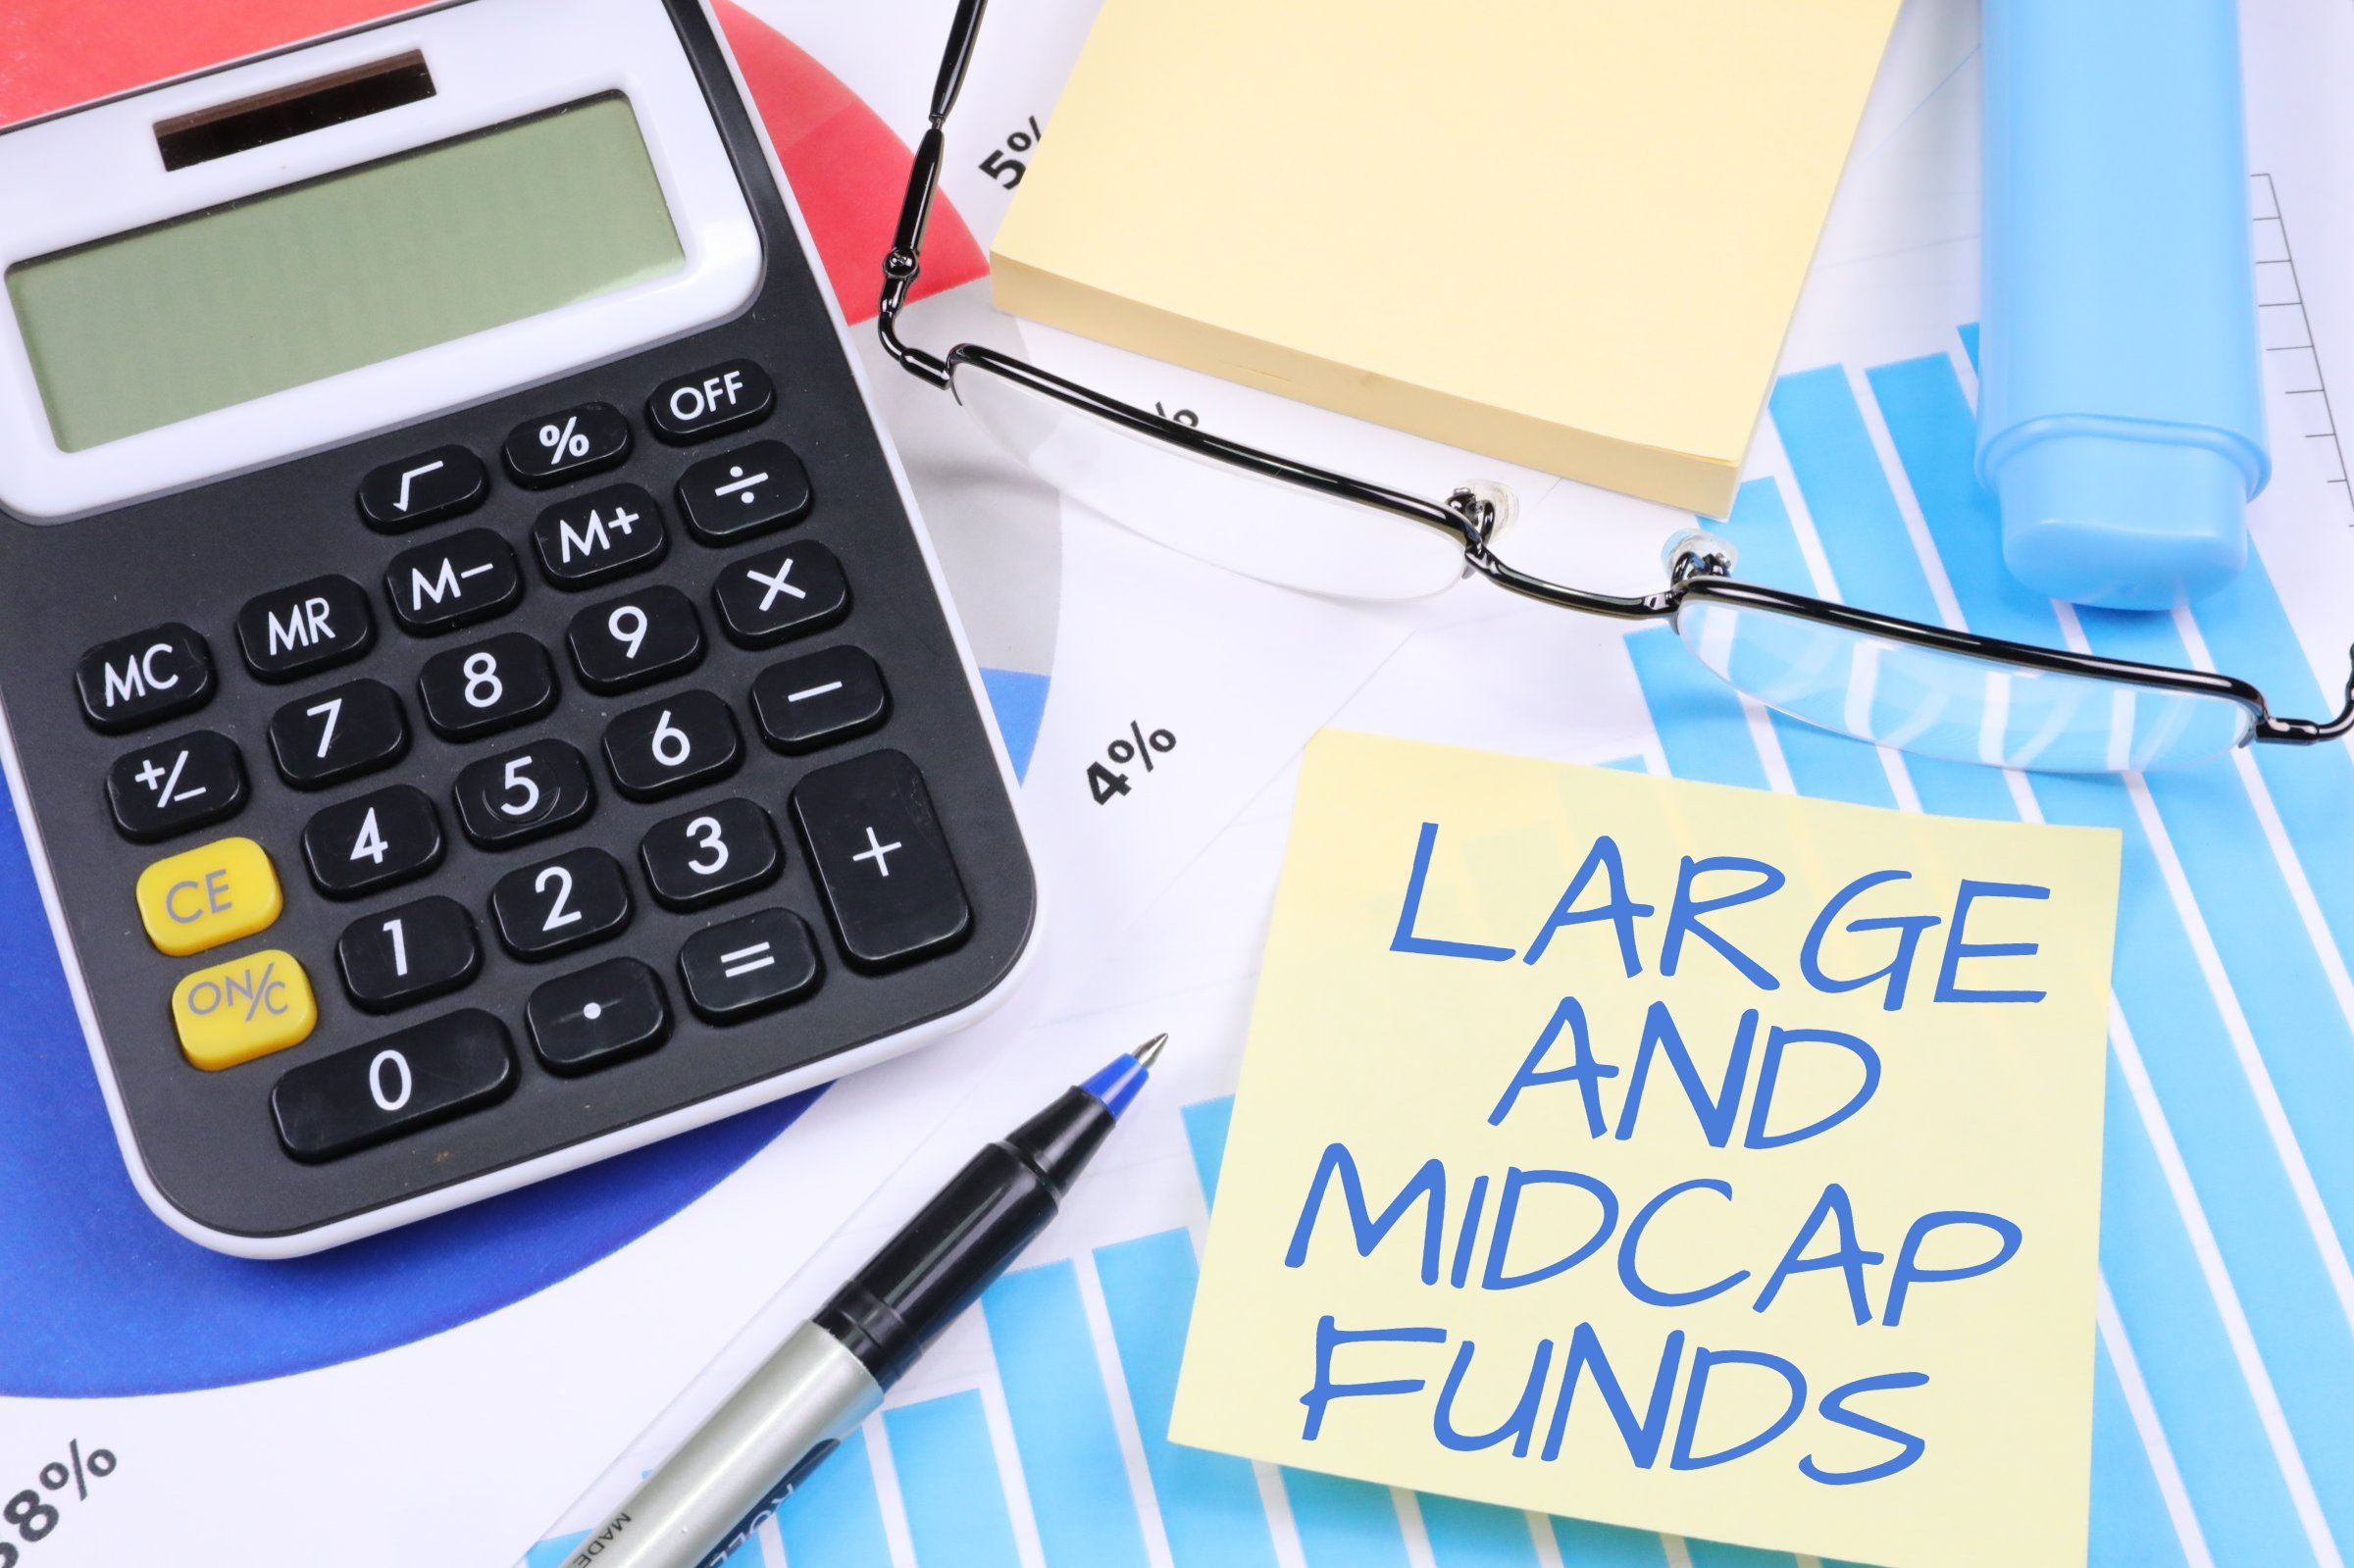 Large and Midcap Funds